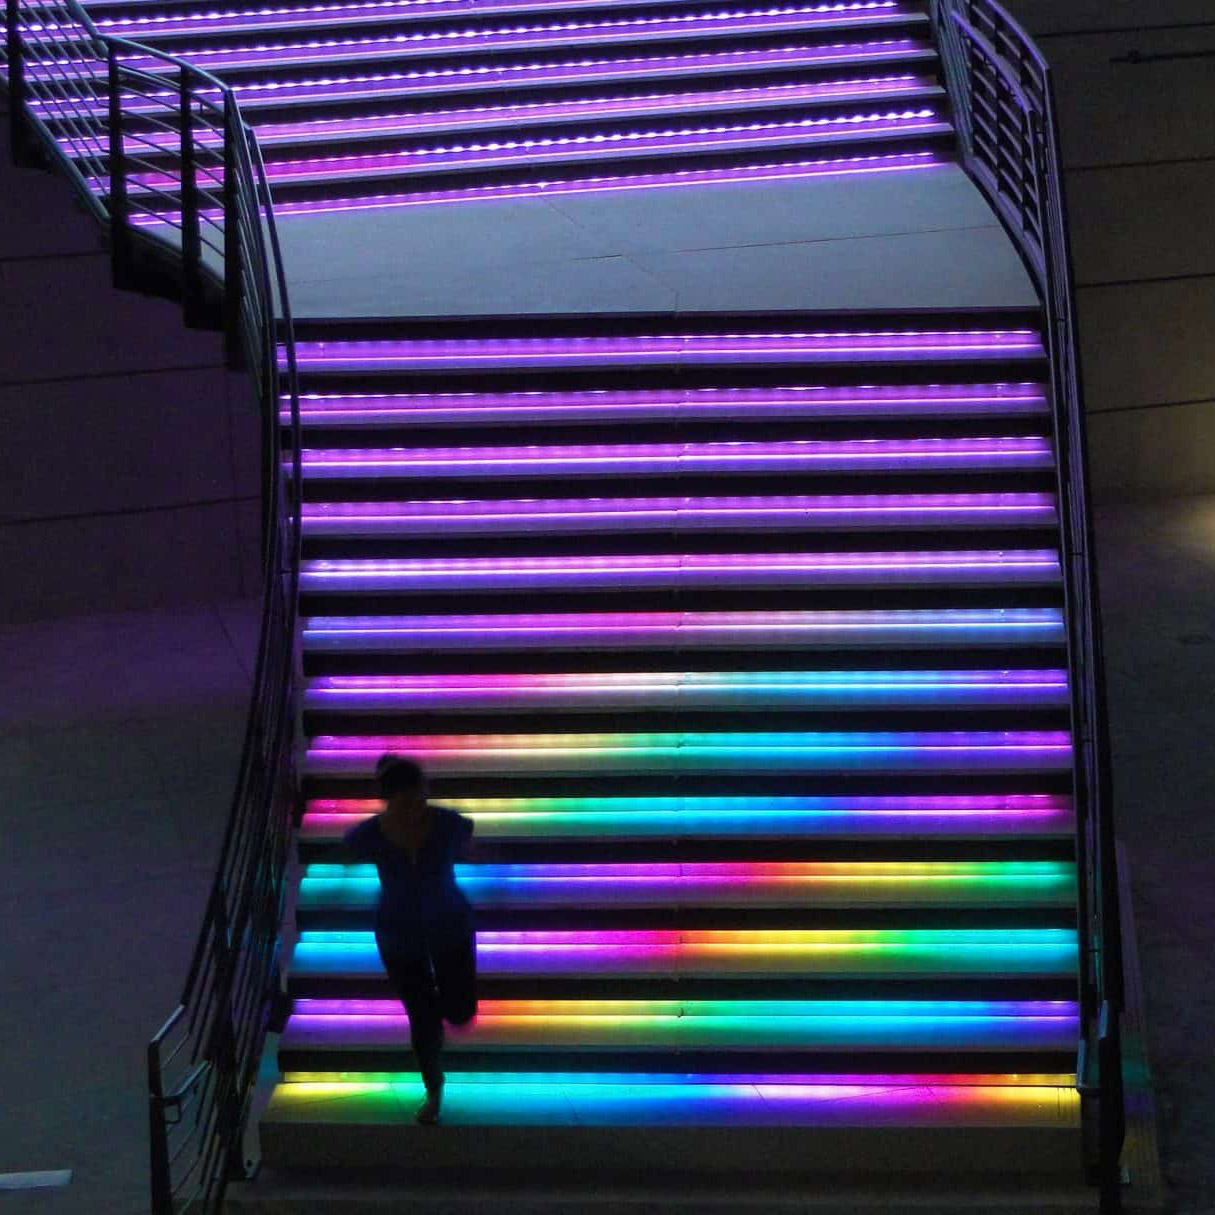 Motion Sensor Stair Lights Indoor Kit - Addressable RGB Color Chasing - LED Strip With Aluminum Channel